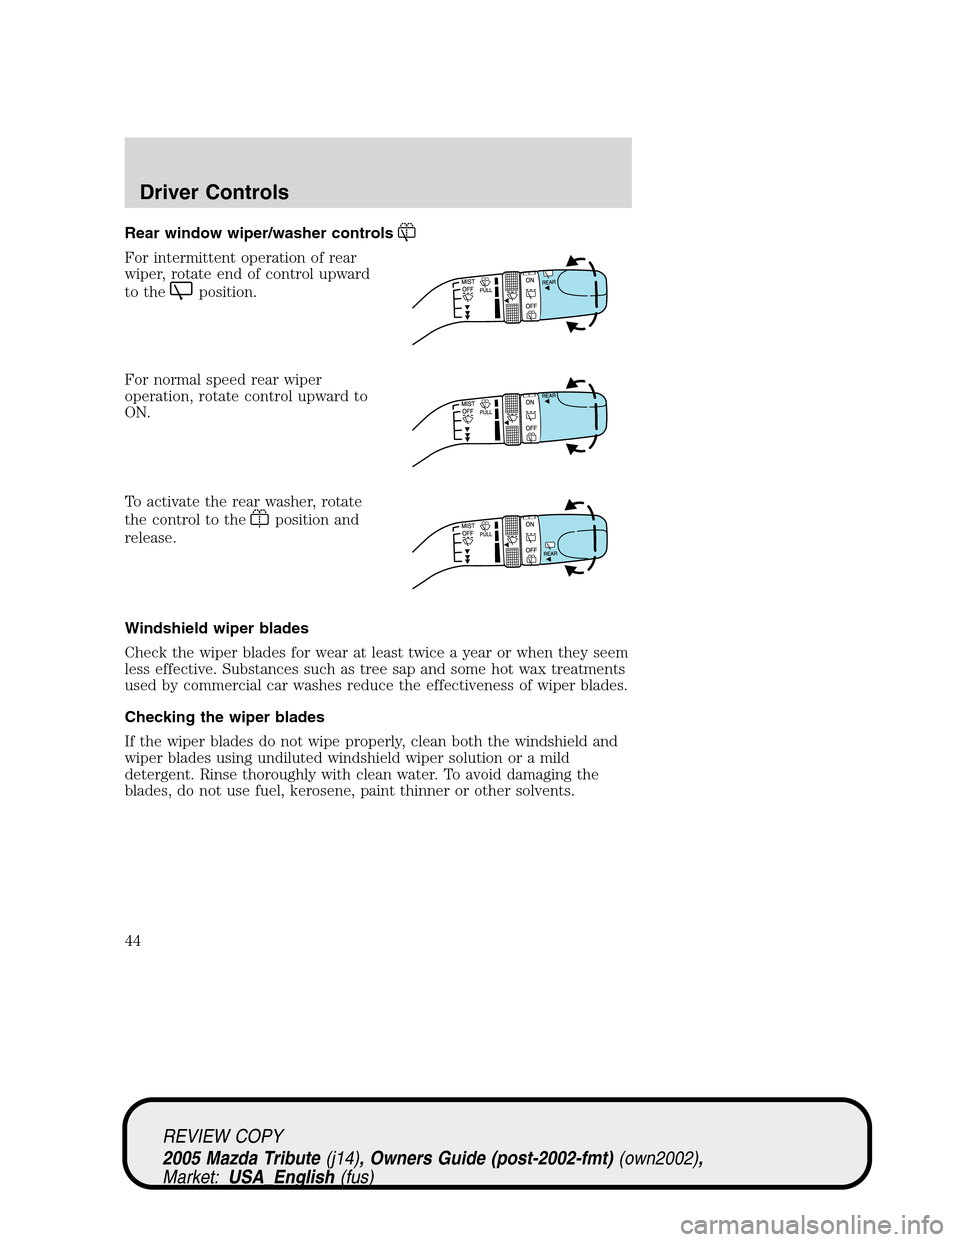 MAZDA MODEL TRIBUTE 2005  Owners Manual (in English) Rear window wiper/washer controls
For intermittent operation of rear
wiper, rotate end of control upward
to the
position.
For normal speed rear wiper
operation, rotate control upward to
ON.
To activat